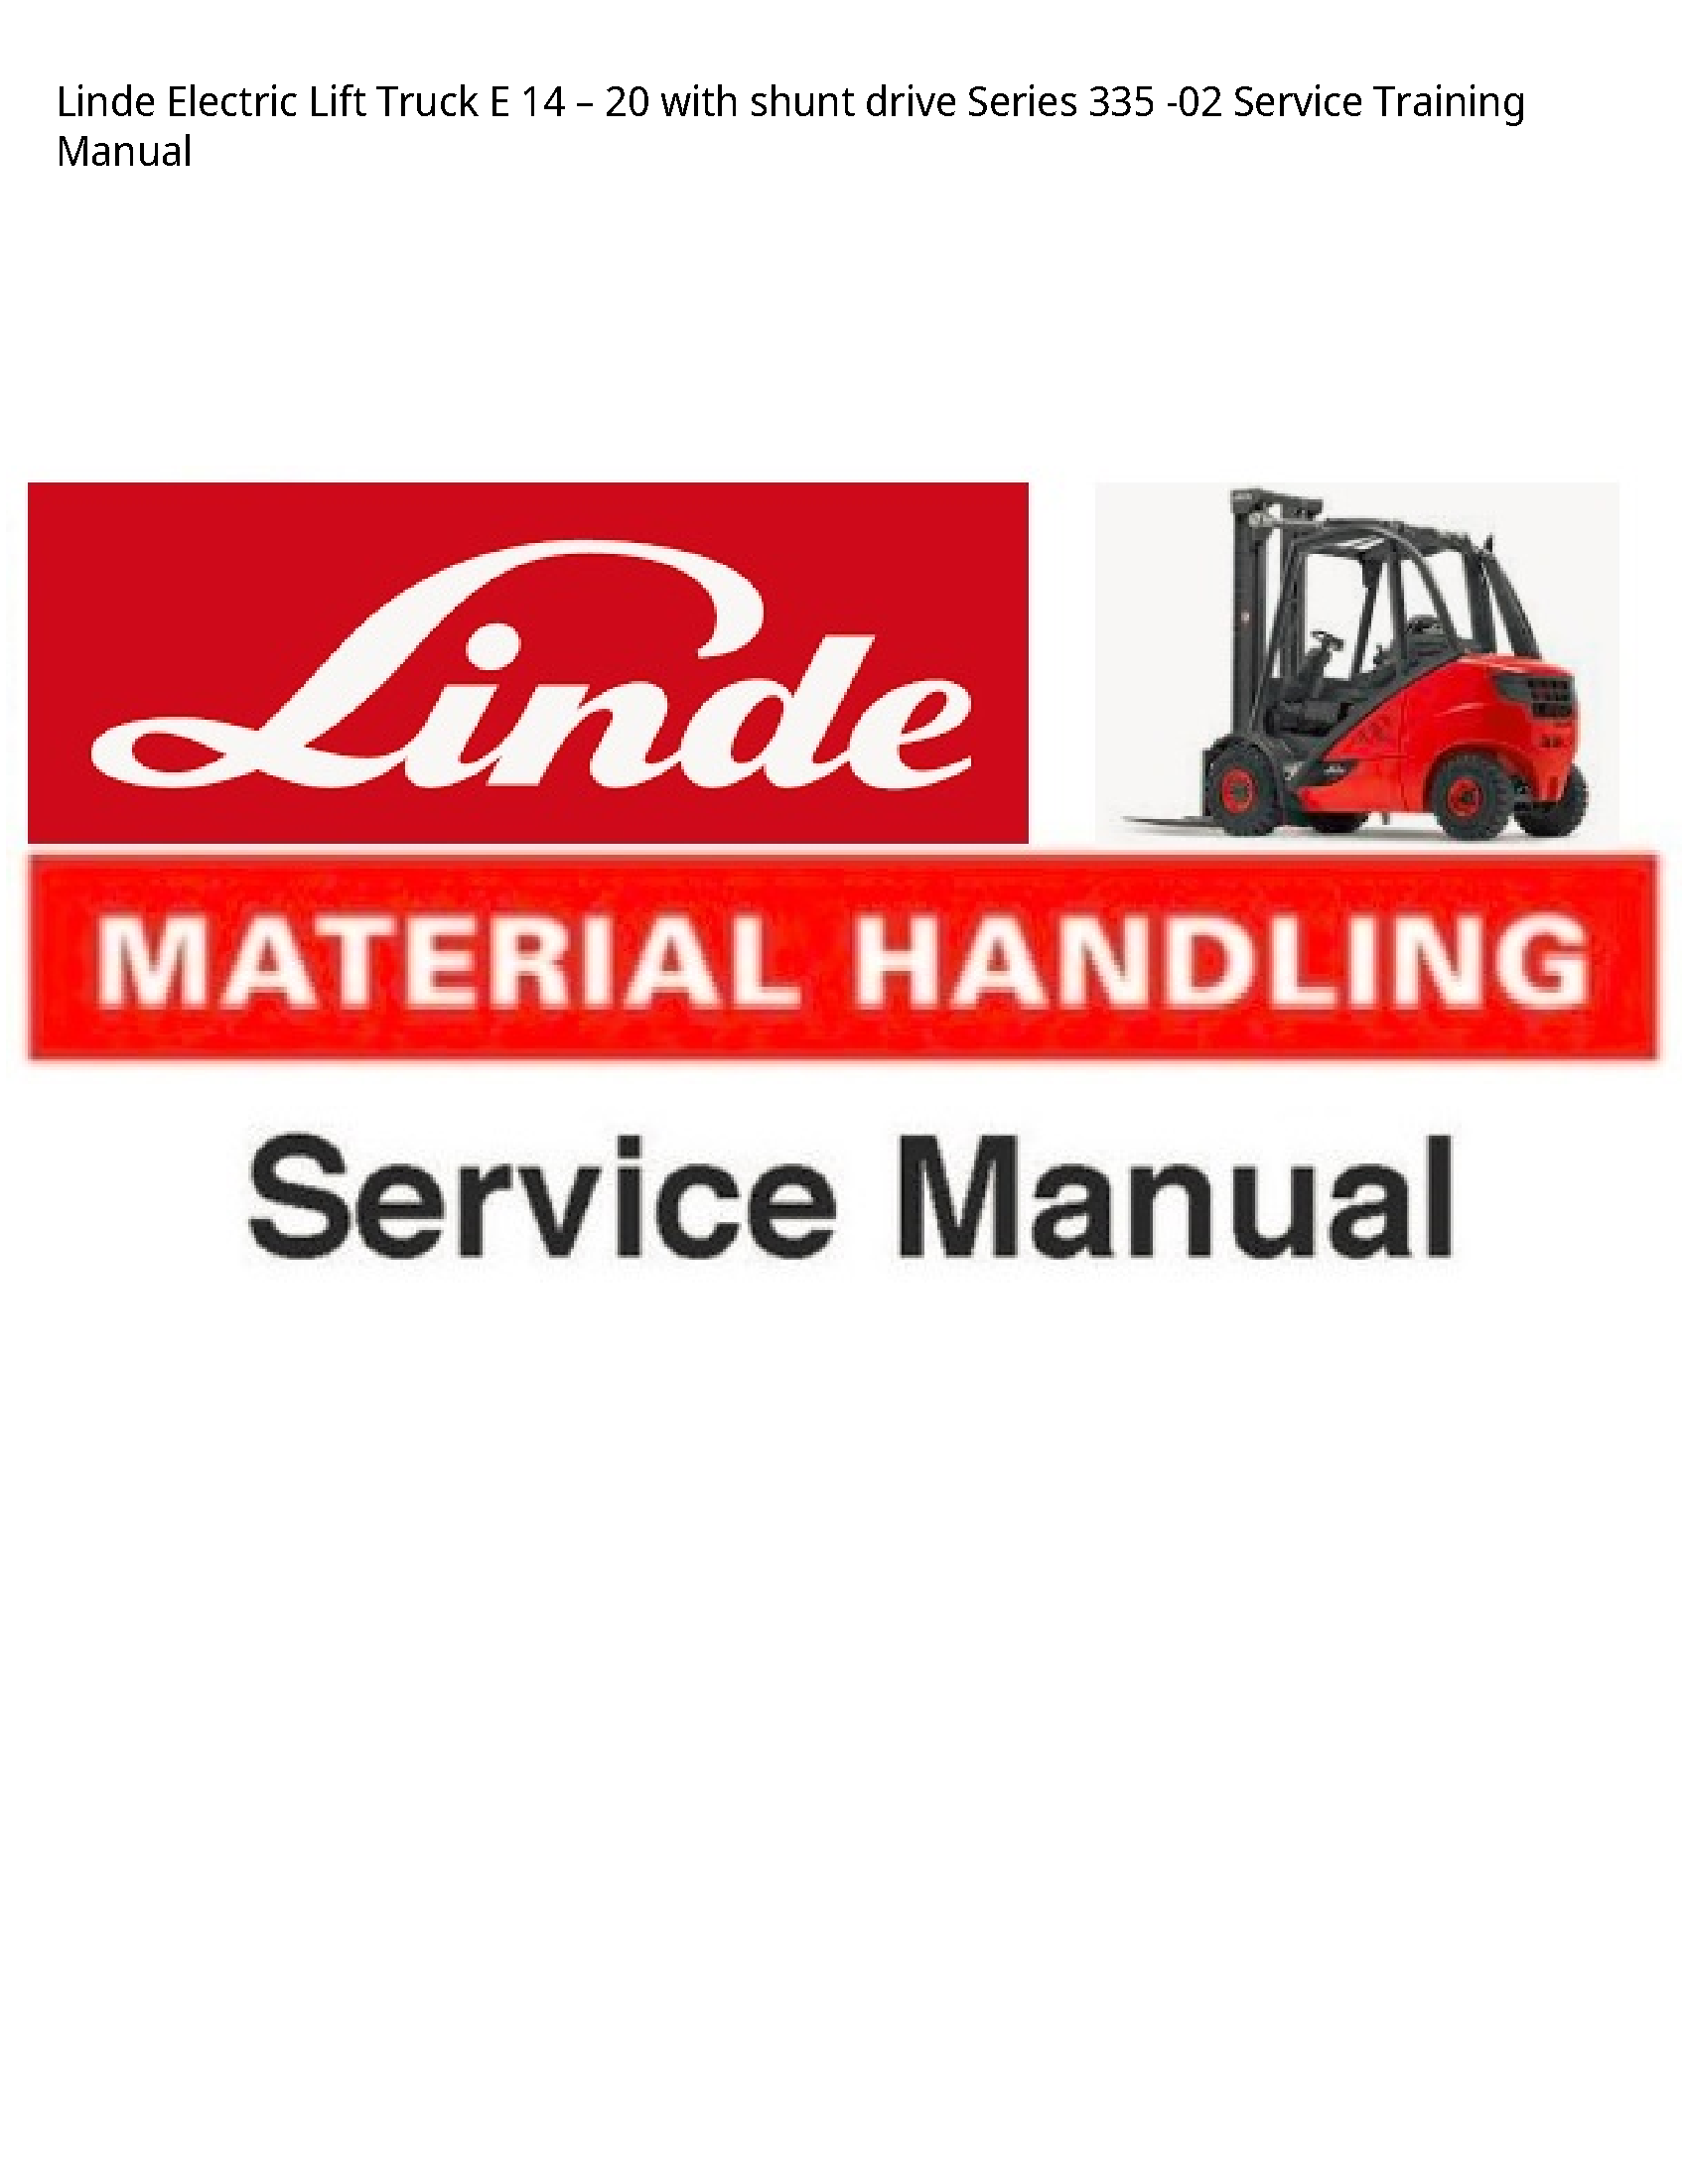 Linde 14 Electric Lift Truck with shunt drive Series Service Training manual